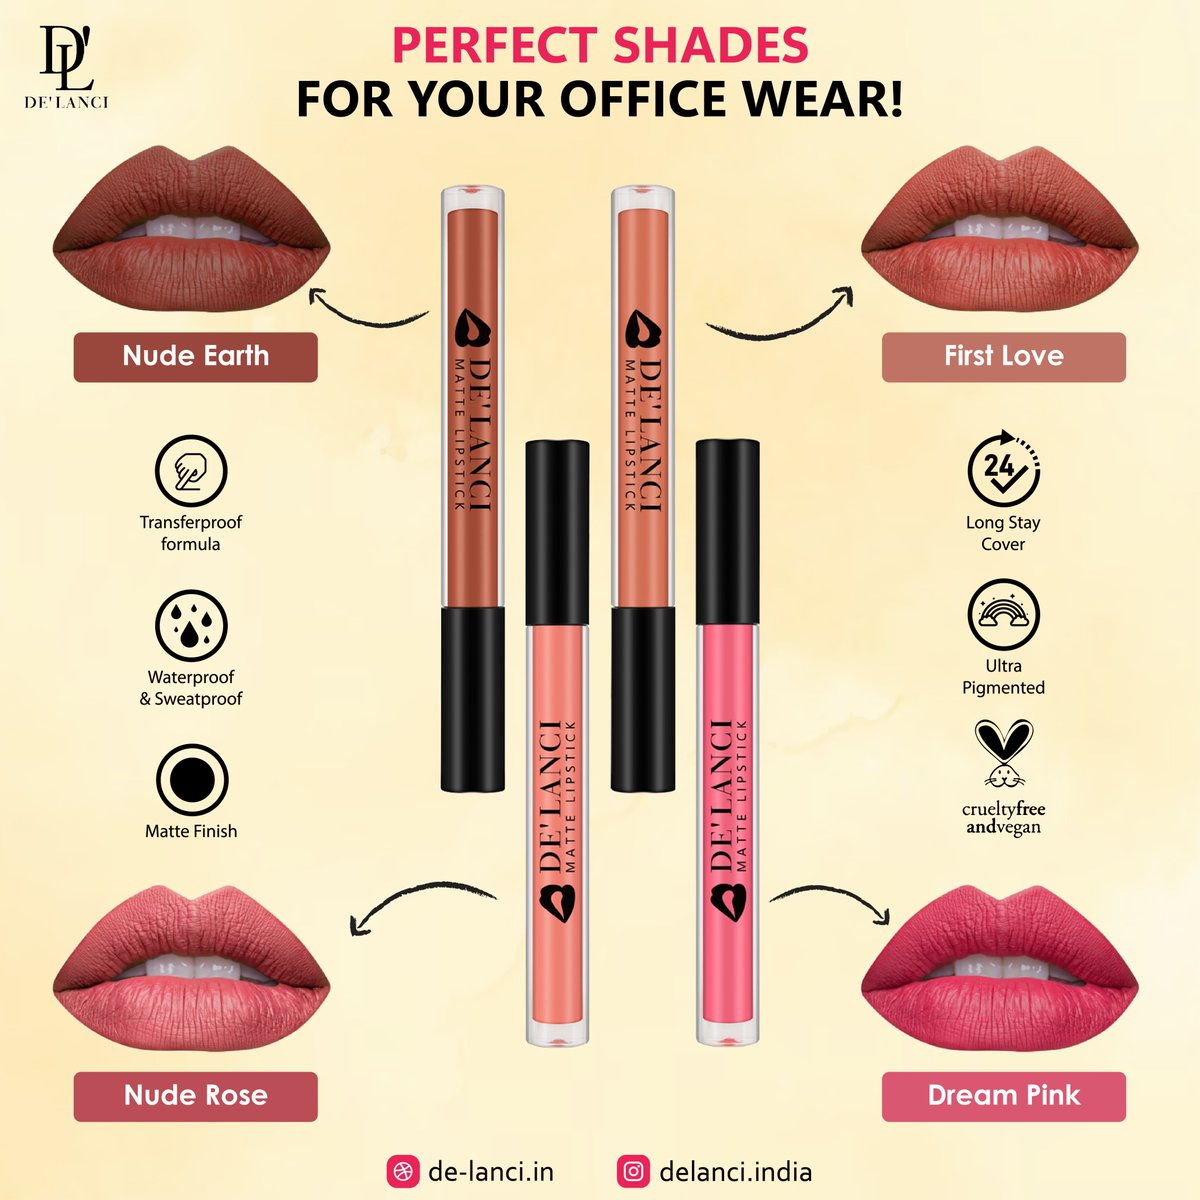 Stay Polished and Professional All Day Long with Our Office-Approved, Long-Lasting Lipsticks😍❤️

Product Name:- De'lanci Aesthetics Matte Lipsticks

#delanciindia #delanci #delancisale #MakeupEssentials #MakeupProducts #crueltyfree #MakeupHacks #lipstick #liquidlipstick